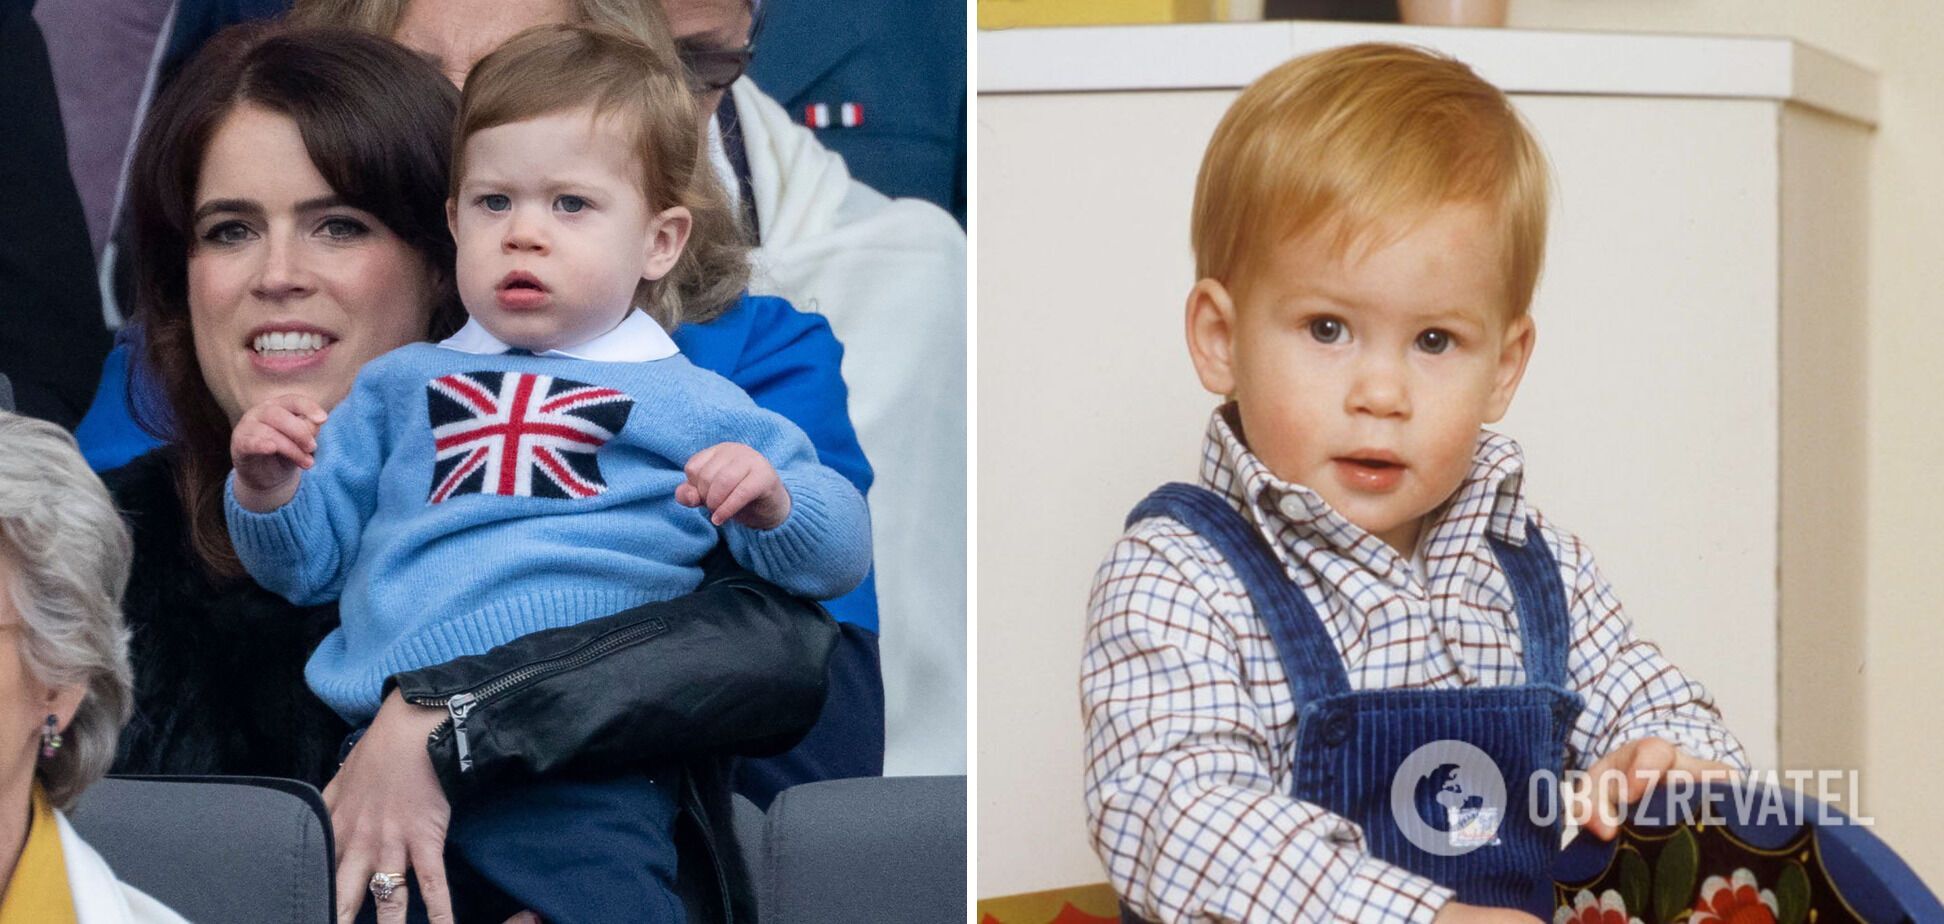 Like two drops of water. Princess Eugenie's son Augustus struck an incredible resemblance to Prince Harry